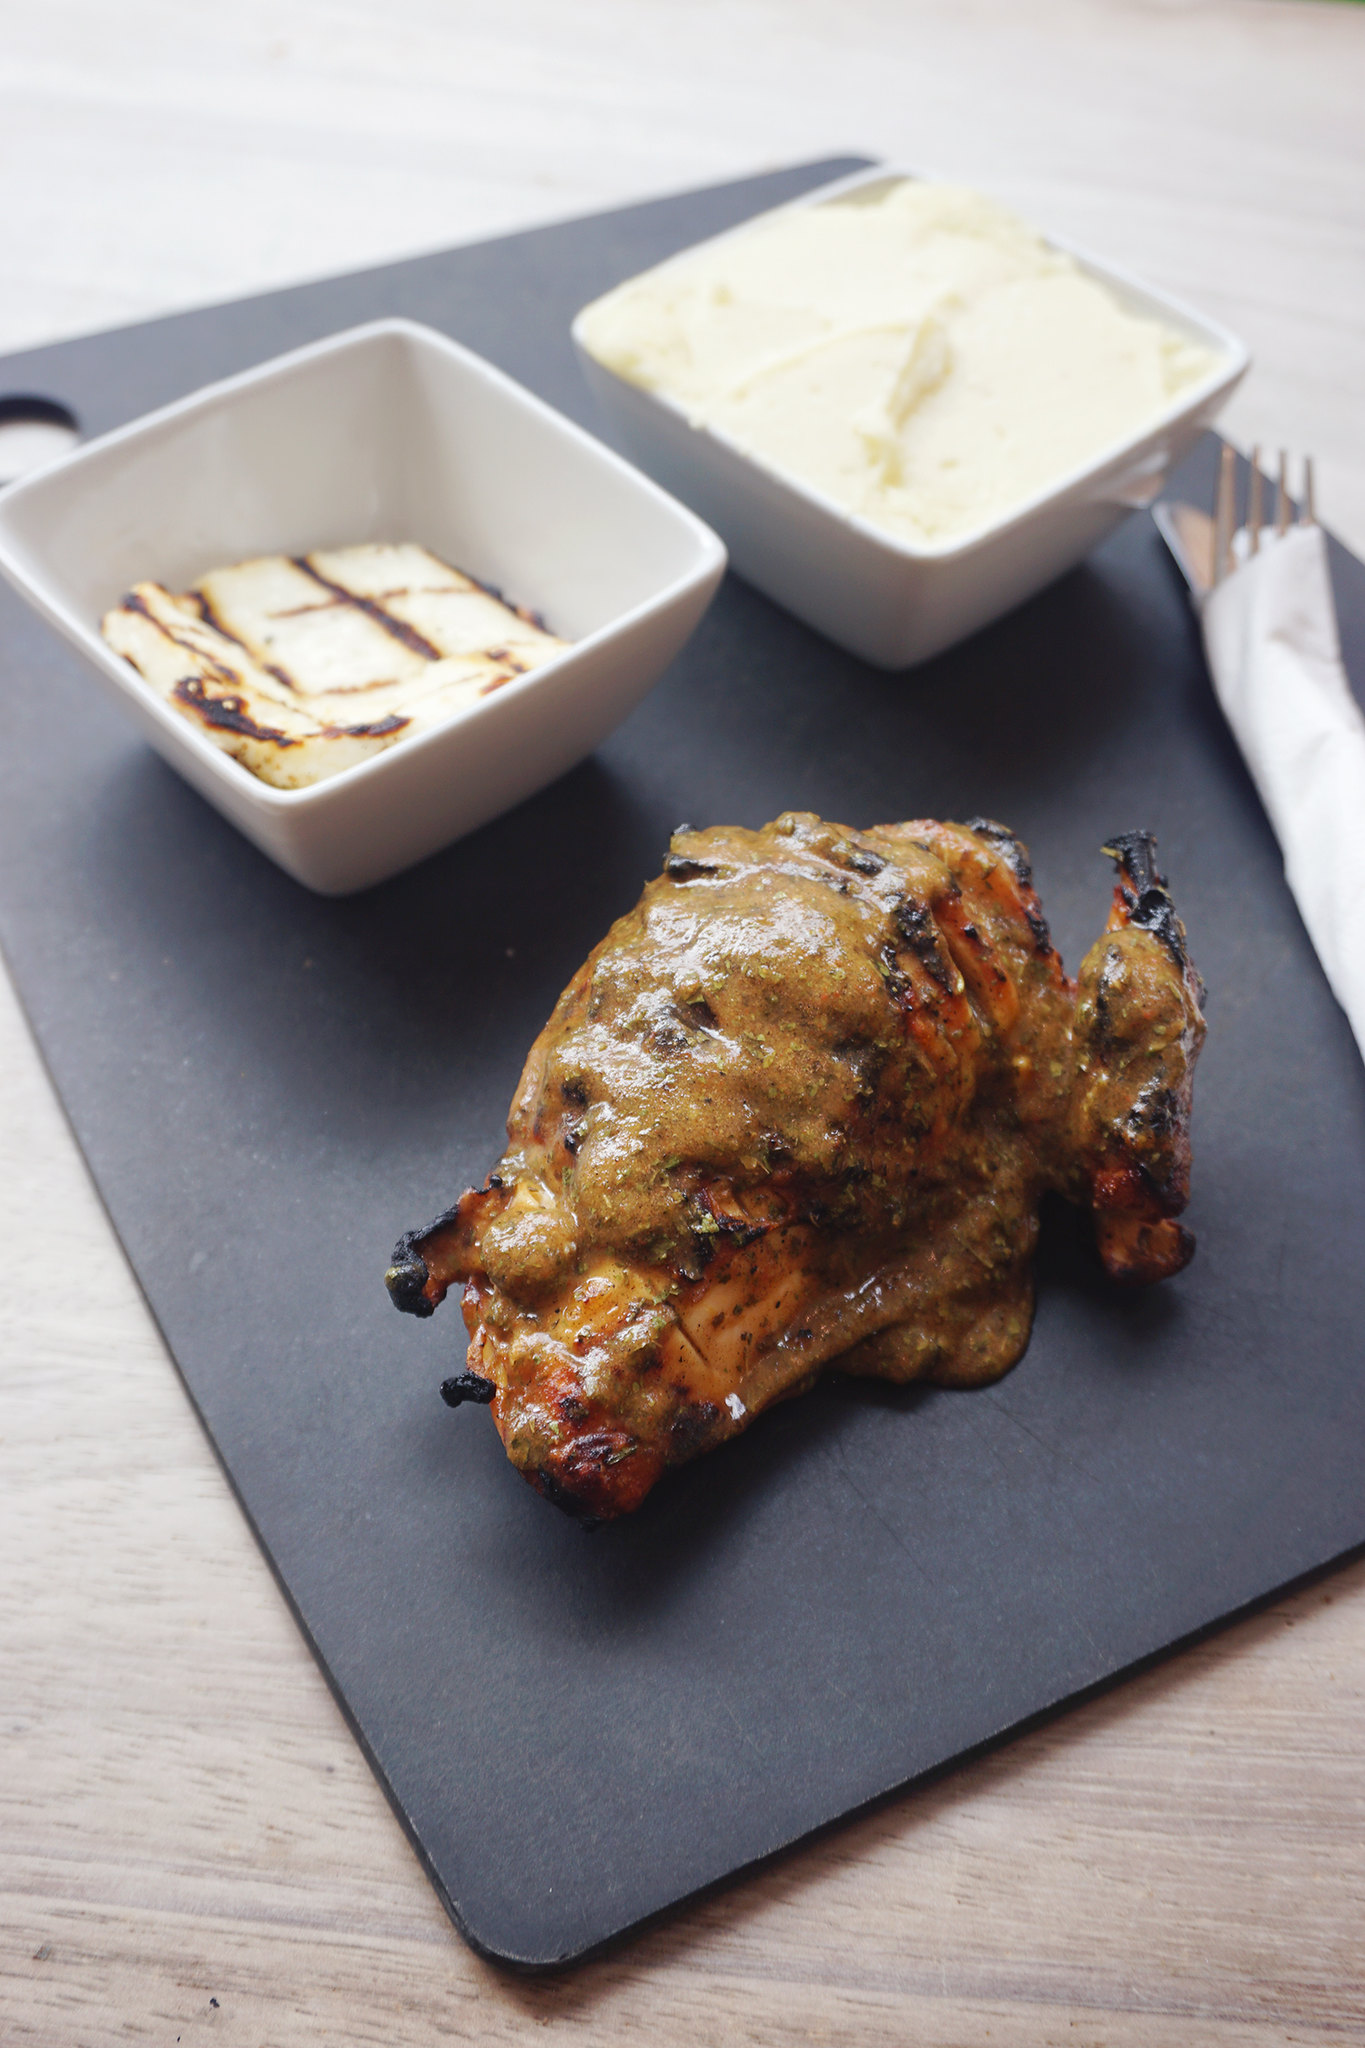 Roosters Piri Piri grilled chicken with Lebanese sauce, grilled halloumi and mashed potatoes | gluten free friendly restaurant chain | London + UK